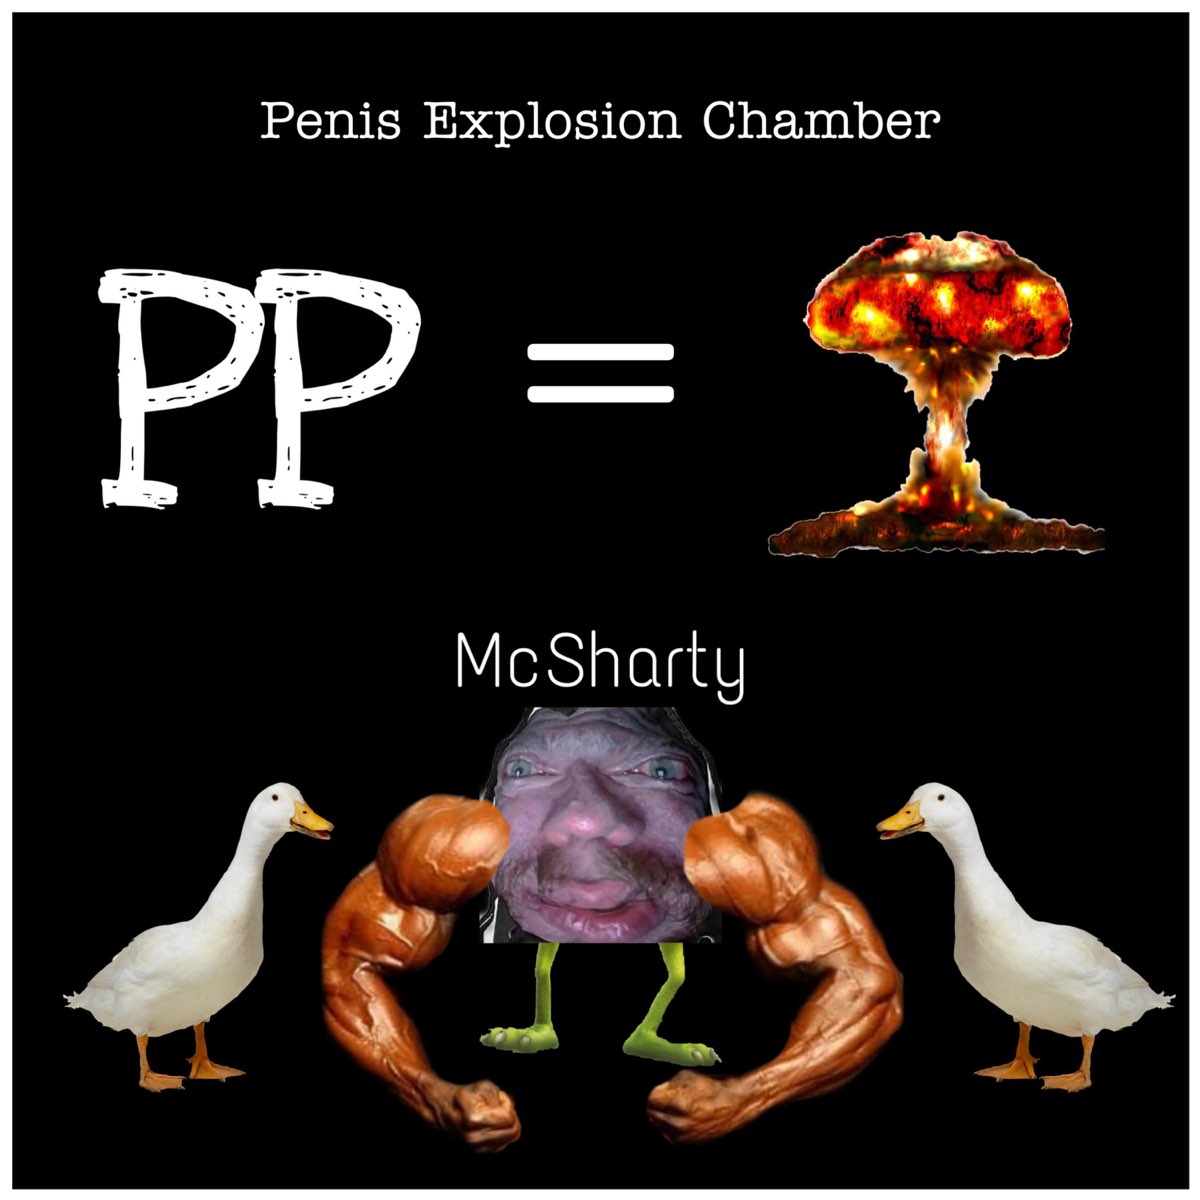 Penis explosion chamber